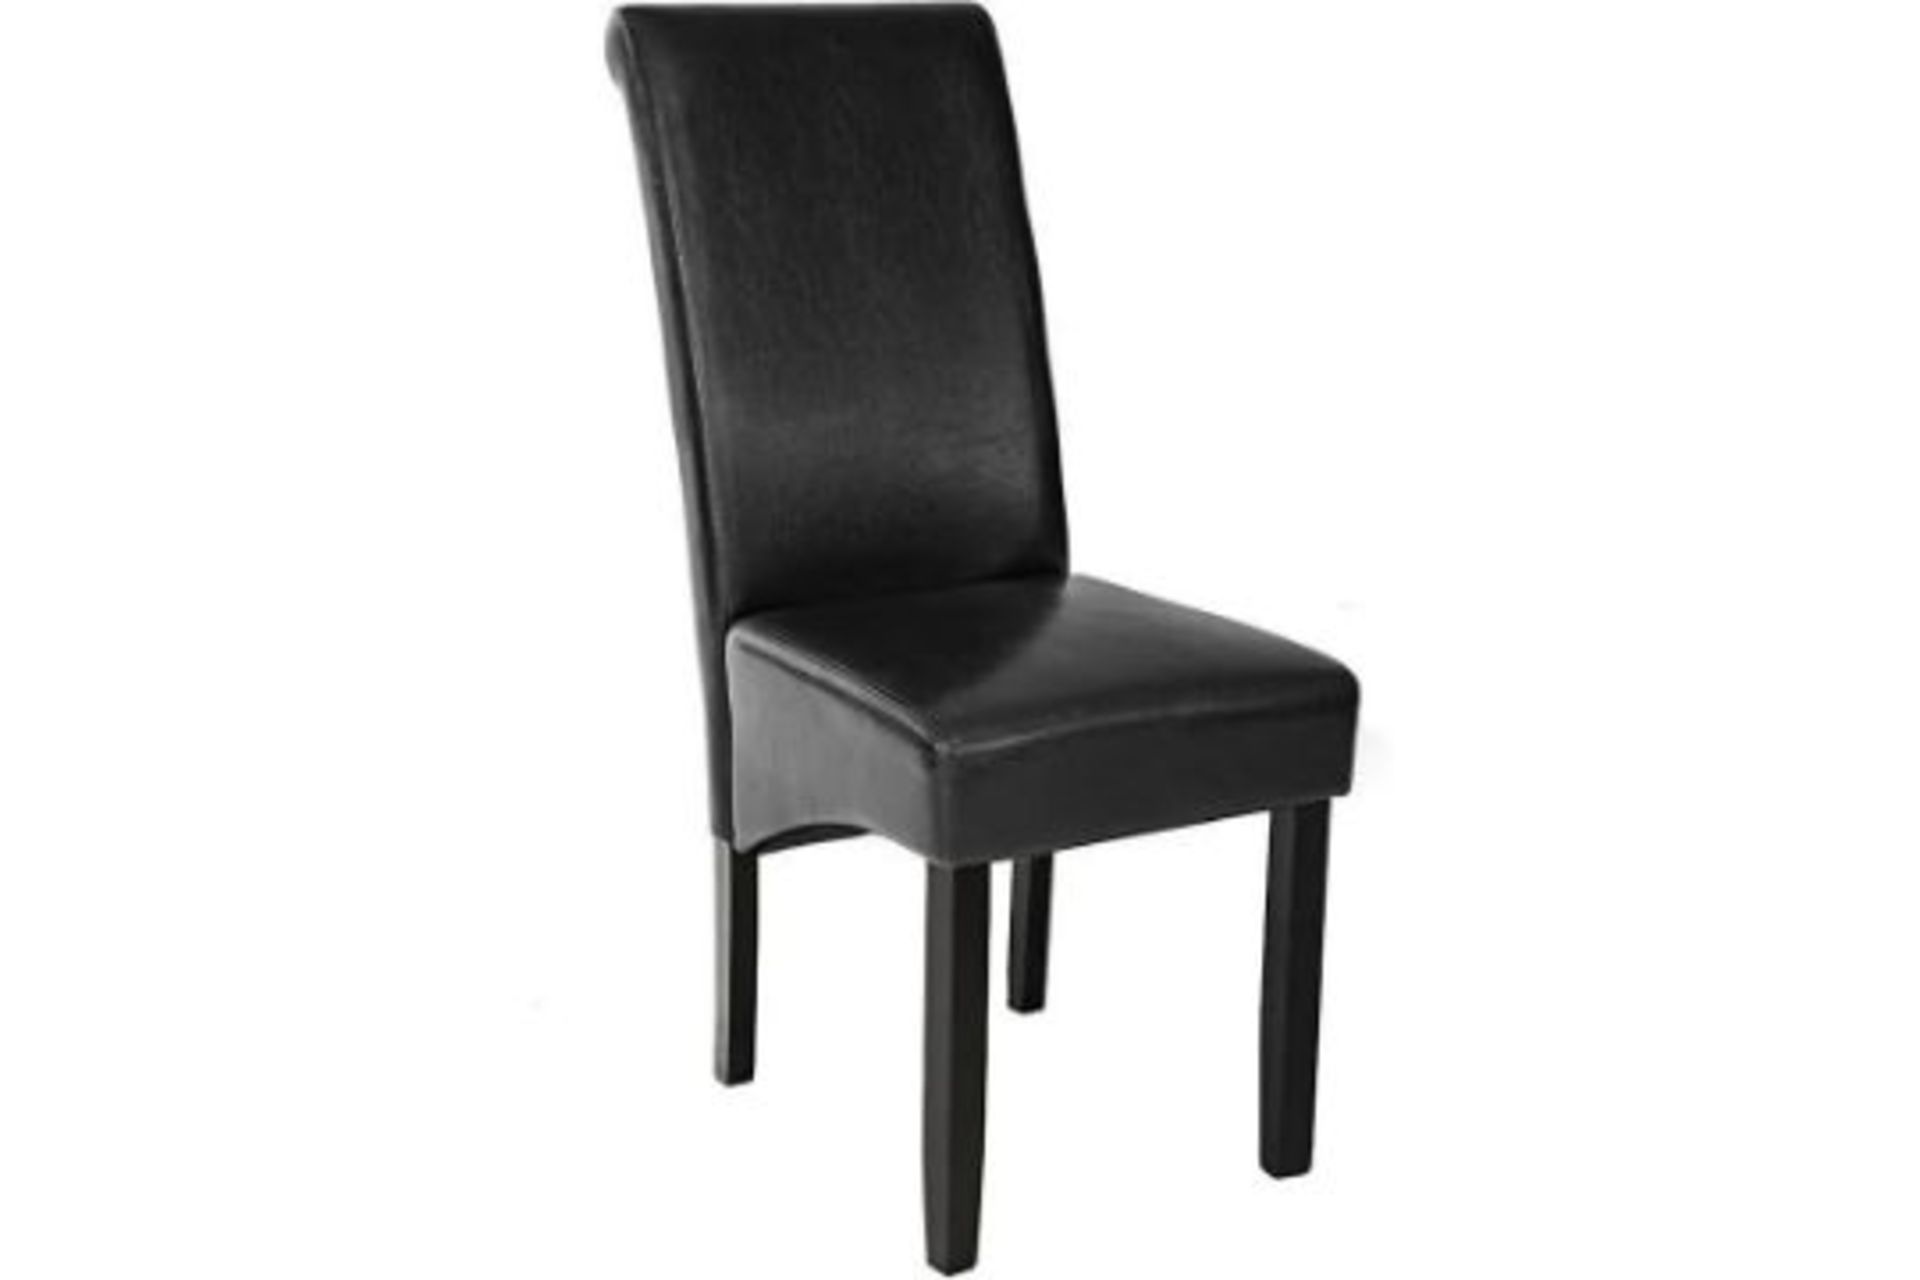 2 x Dining chair with ergonomic seat shape black. - R13A.11. RRP £209.00. This elegant dining